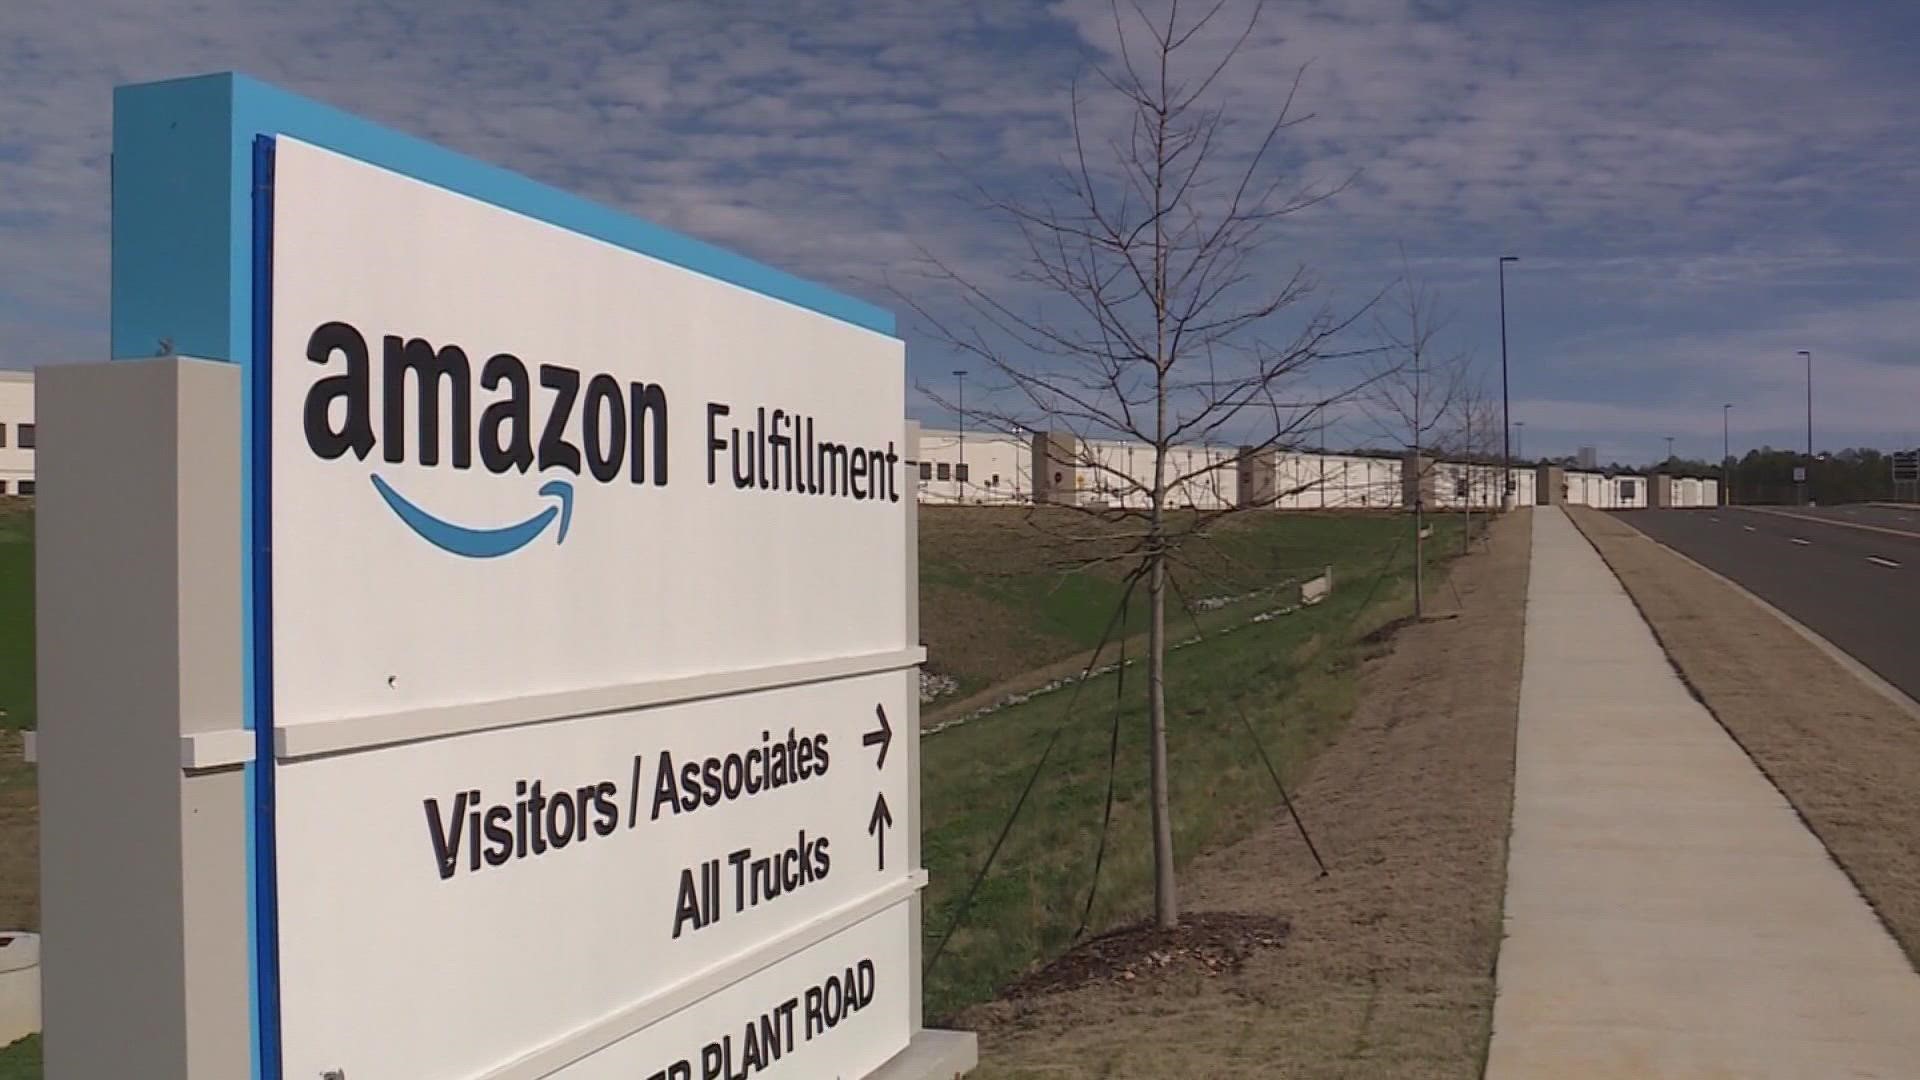 National labor officials say Amazon violated labor laws during the last union vote at the Bessemer, AL warehouse.